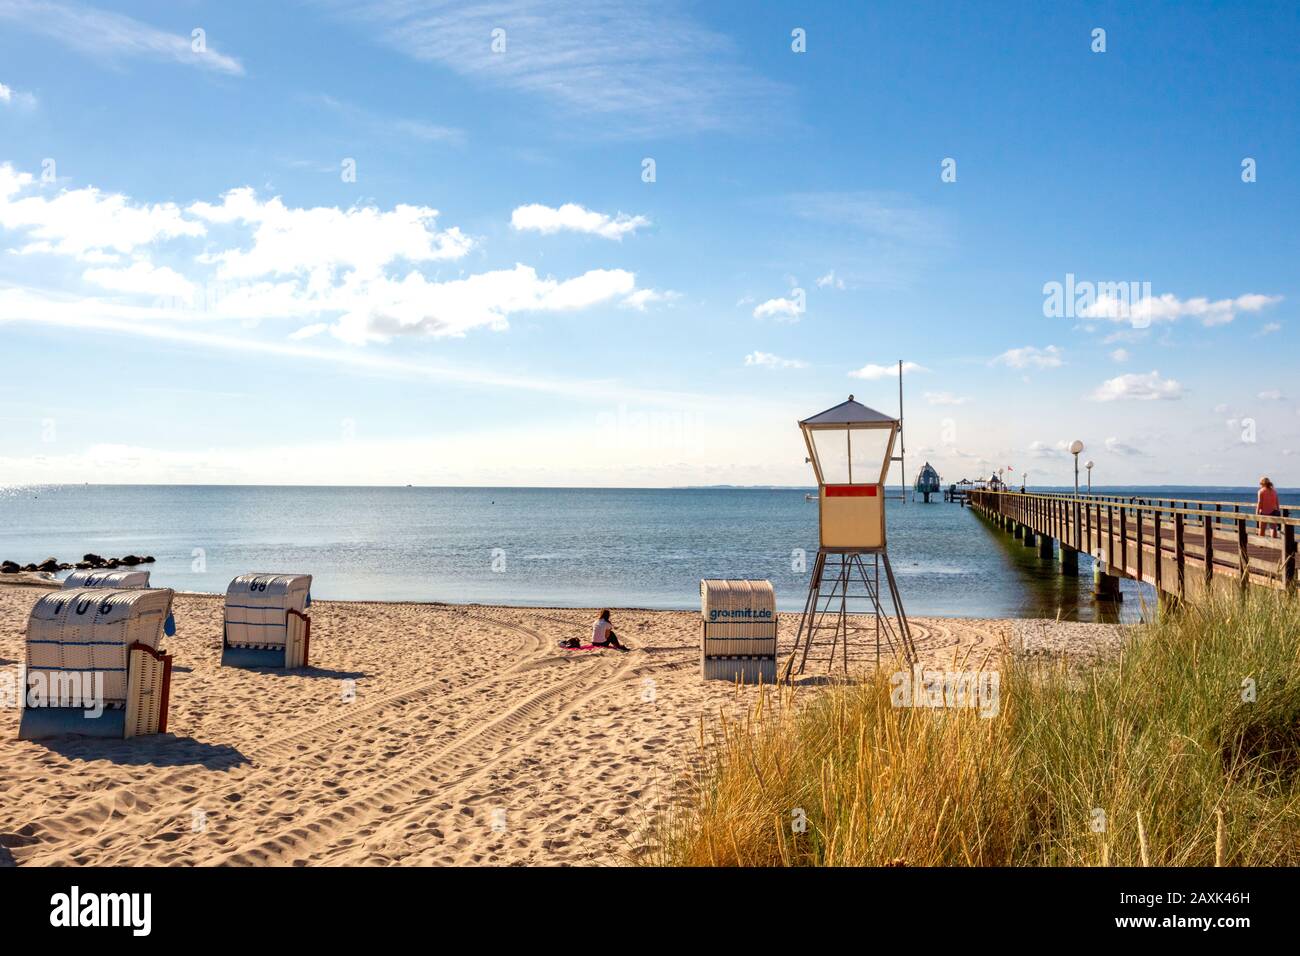 Pier And Beach, Groemitz, Allemagne Banque D'Images